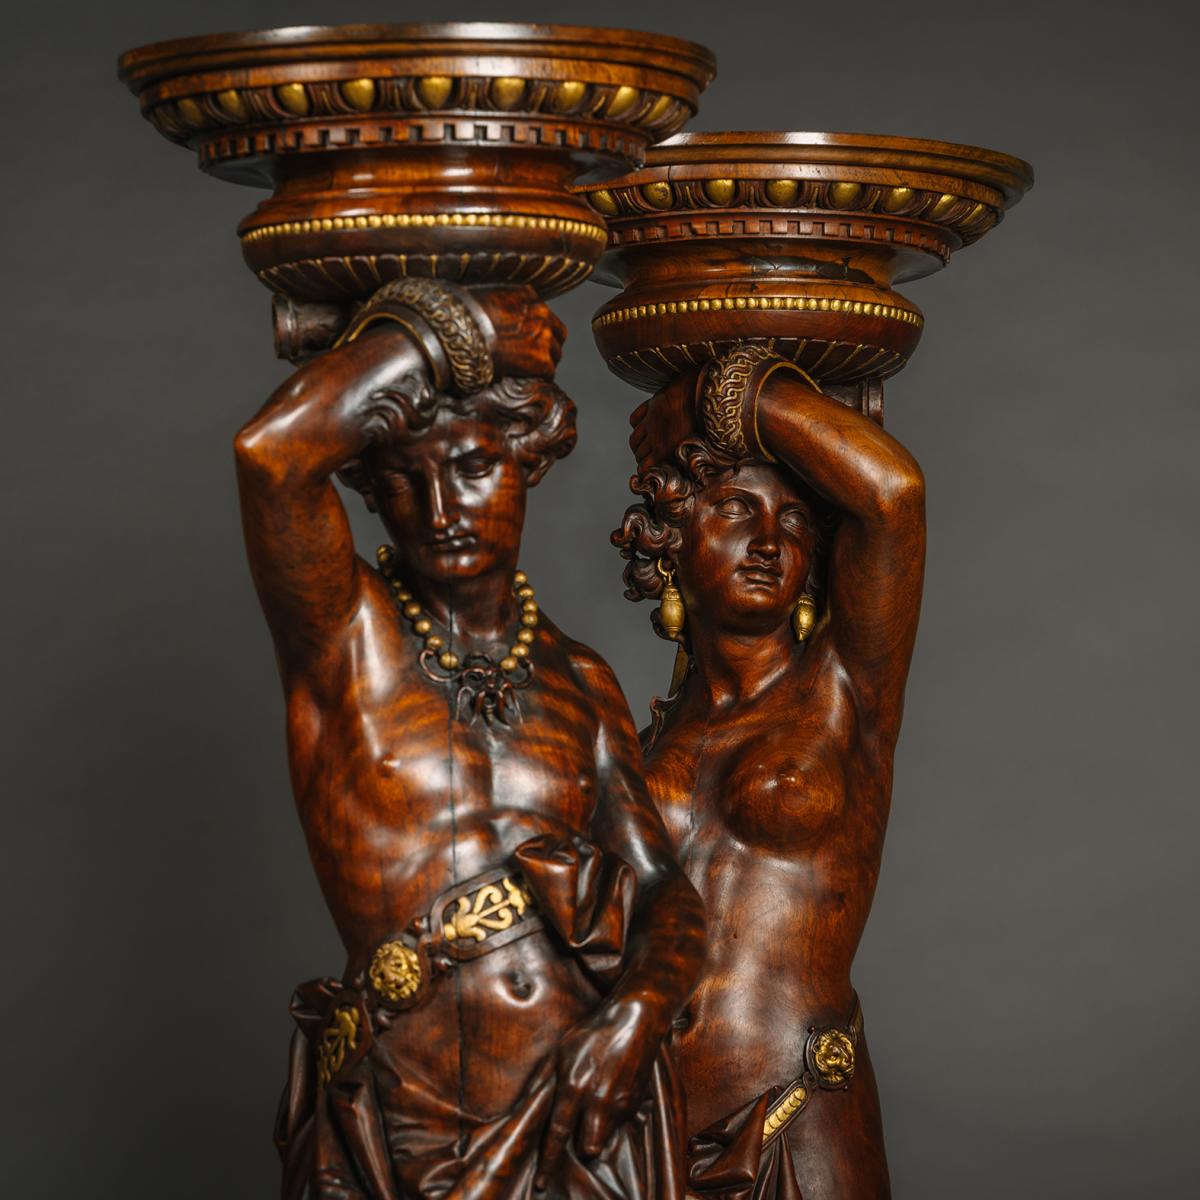 Italian Carved Walnut and Parcel Gilt Figural Torchères by Angiolo Barbetti, (1805-1873)